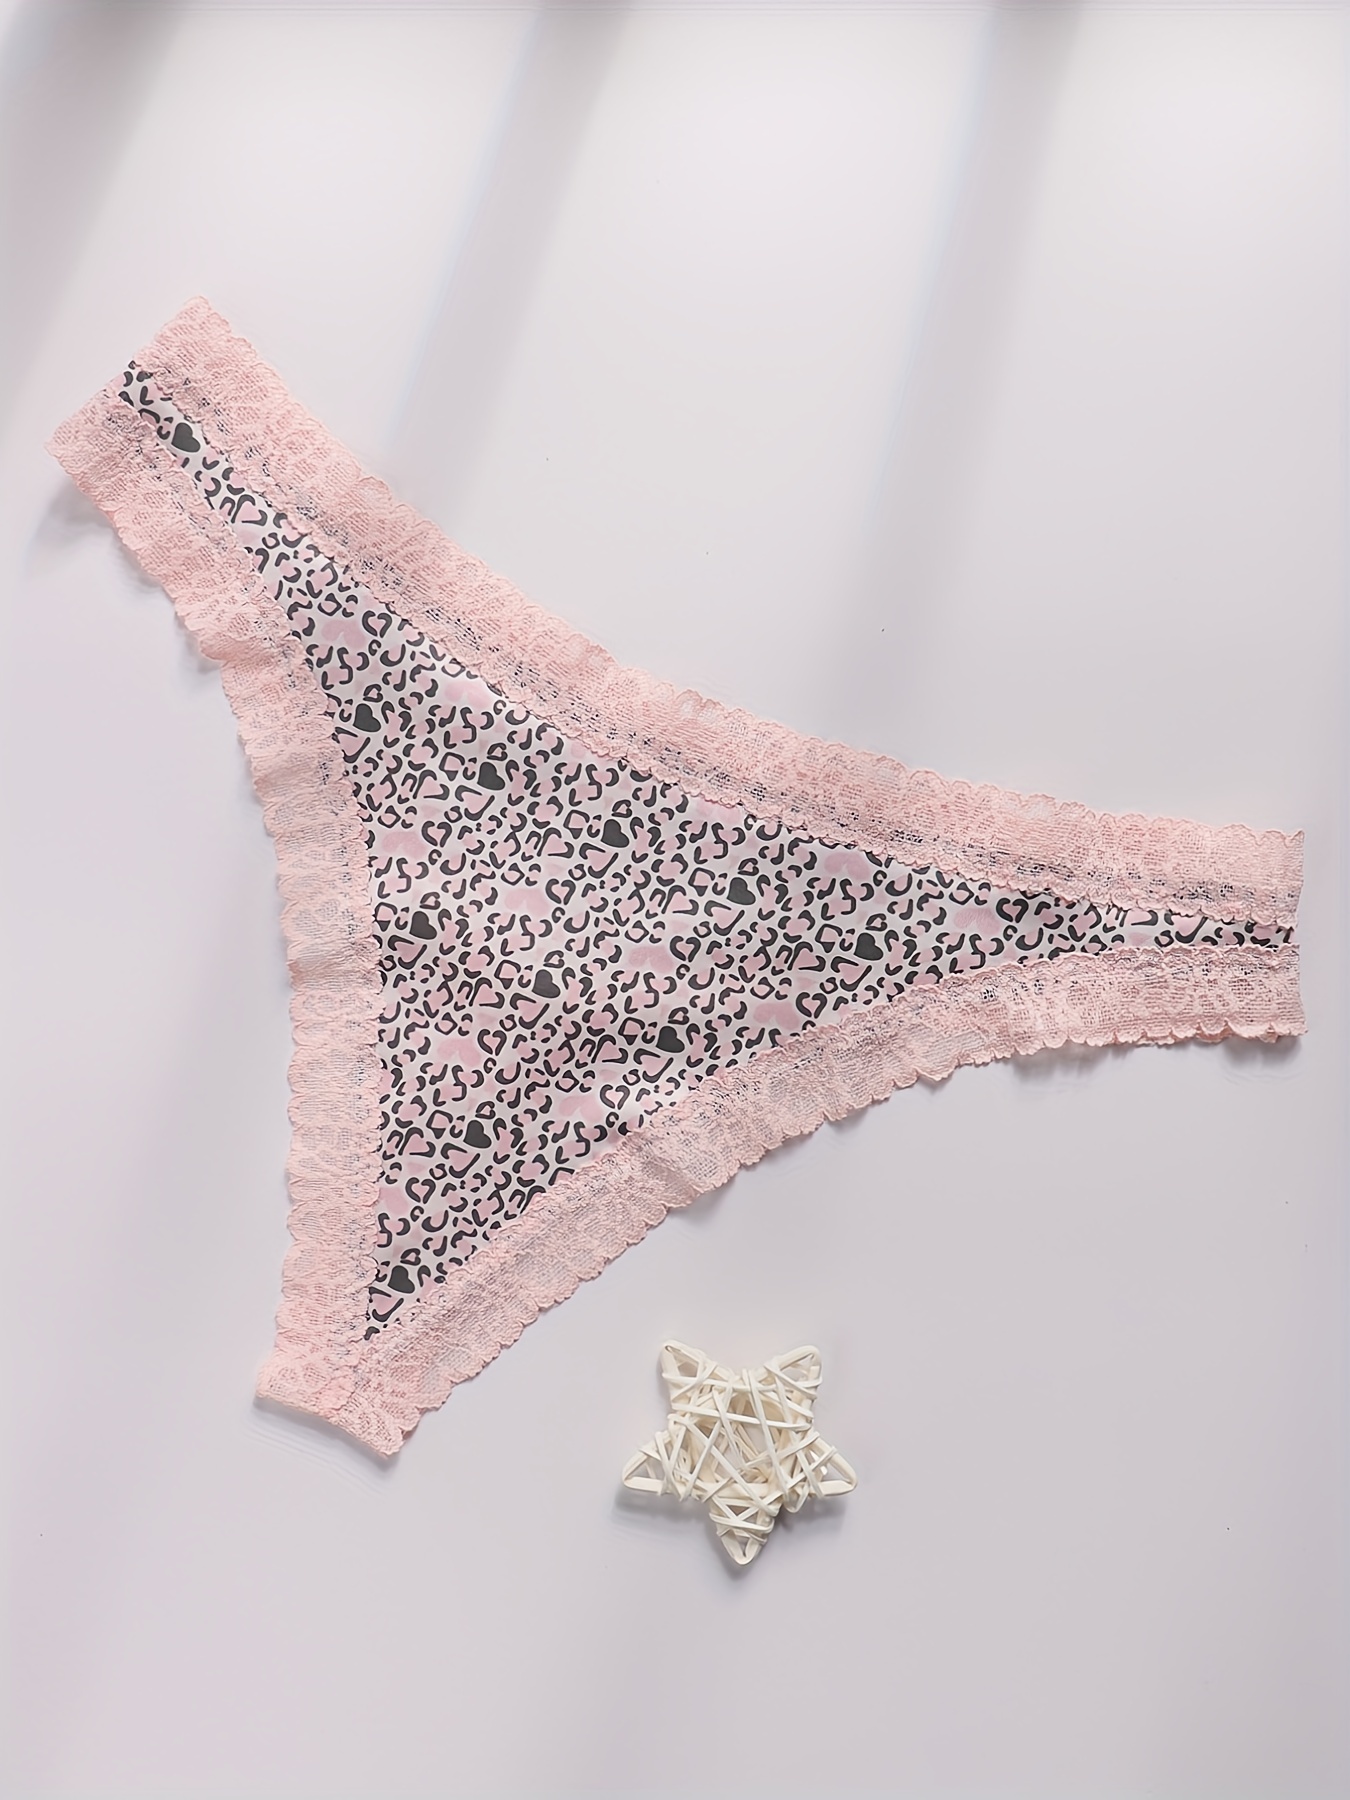 Heart Leopard Print Thongs Soft Comfy Contrast Lace Stretchy - Temu